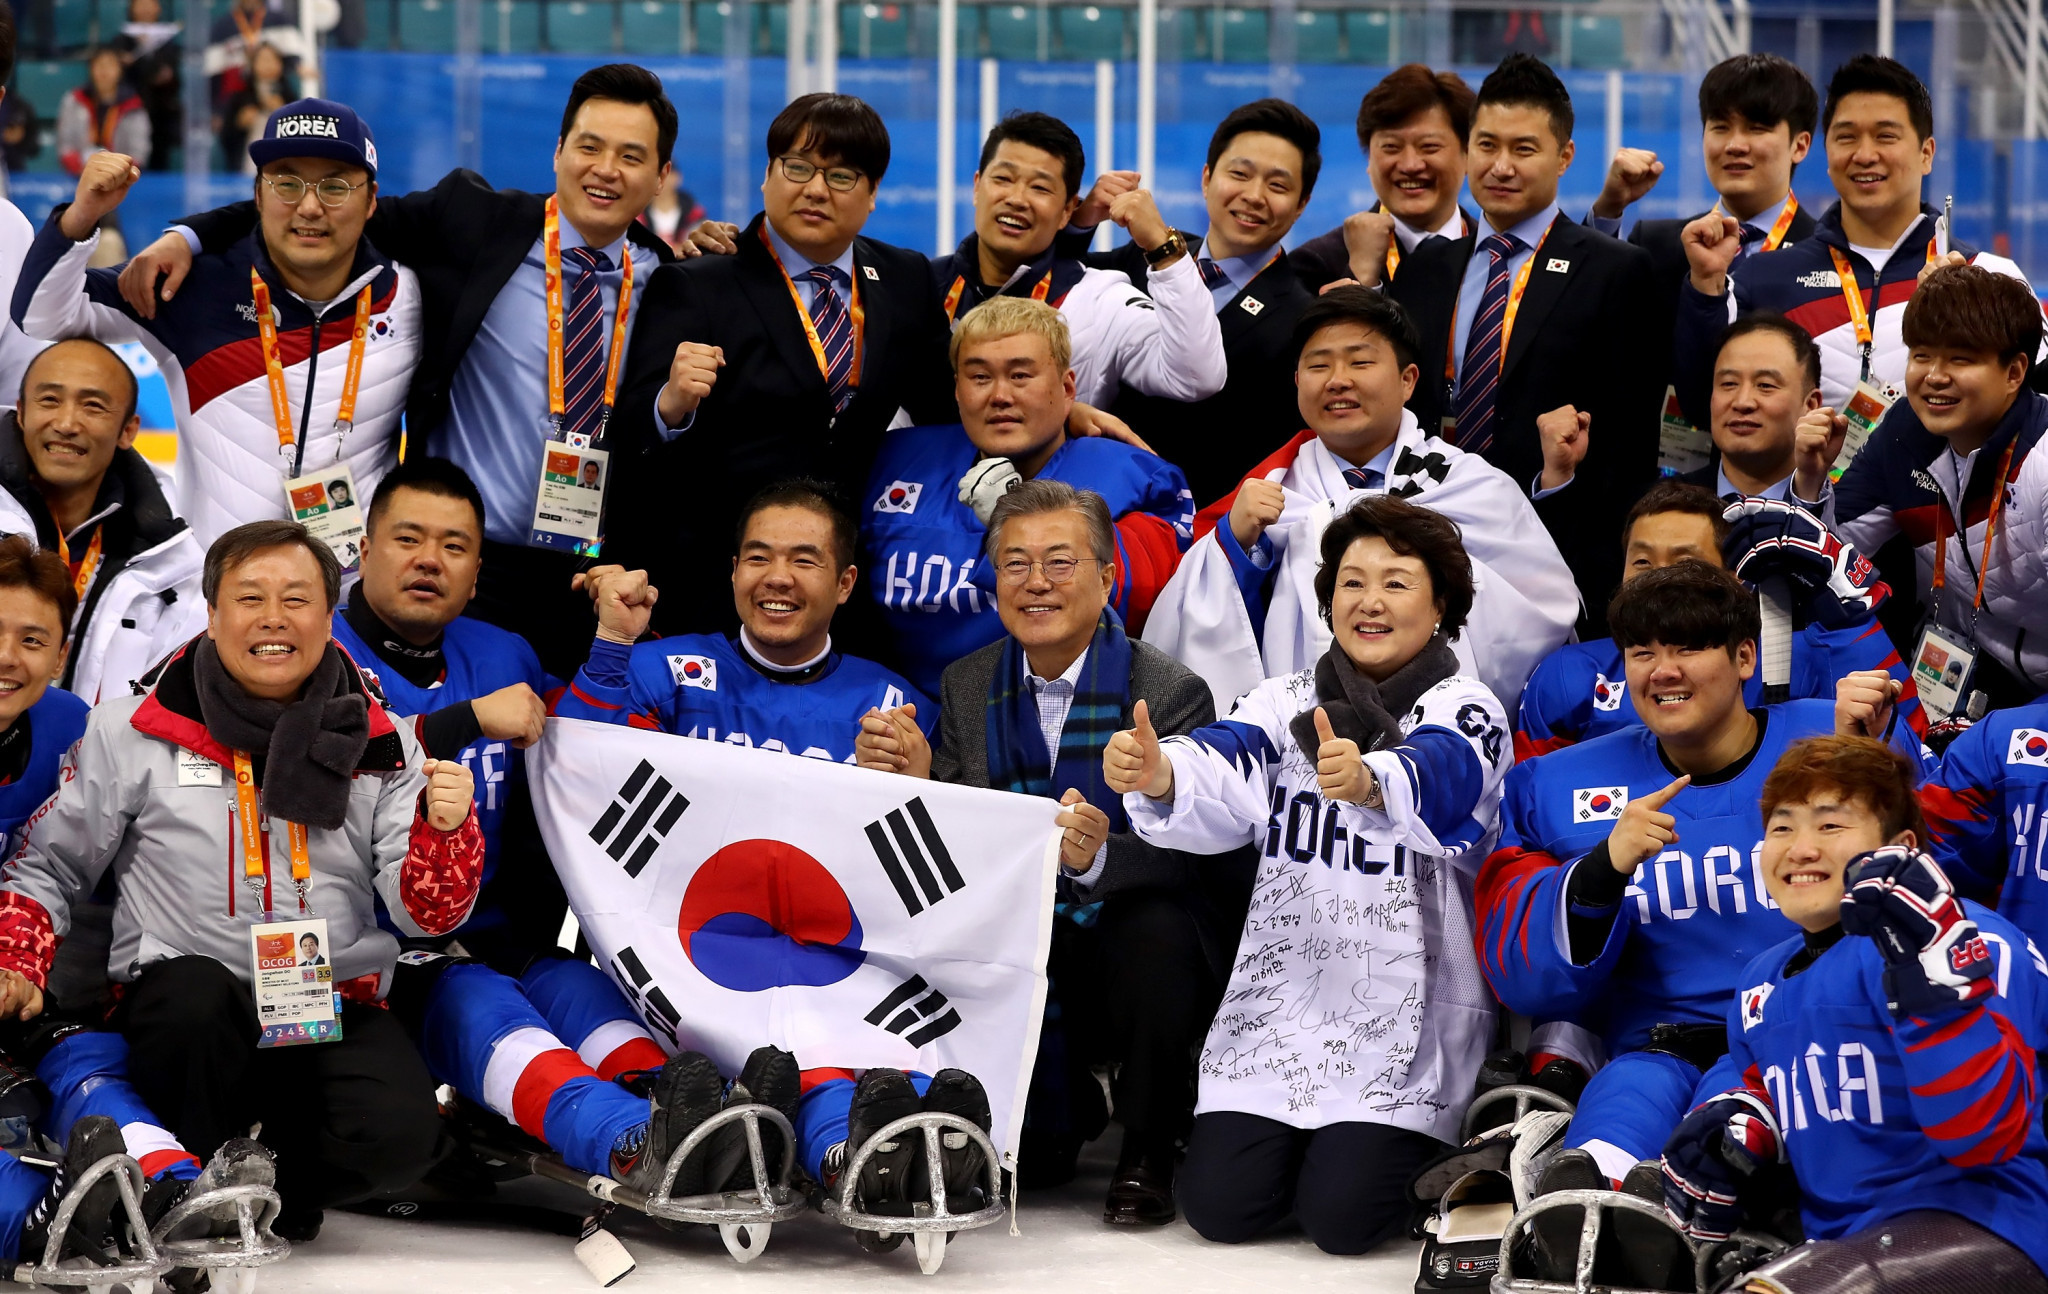 South Korean President Moon Jae-in joined in the celebrations after South Korea overcame Italy 1-0 in the ice hockey tournament's bronze medal game ©Getty Images